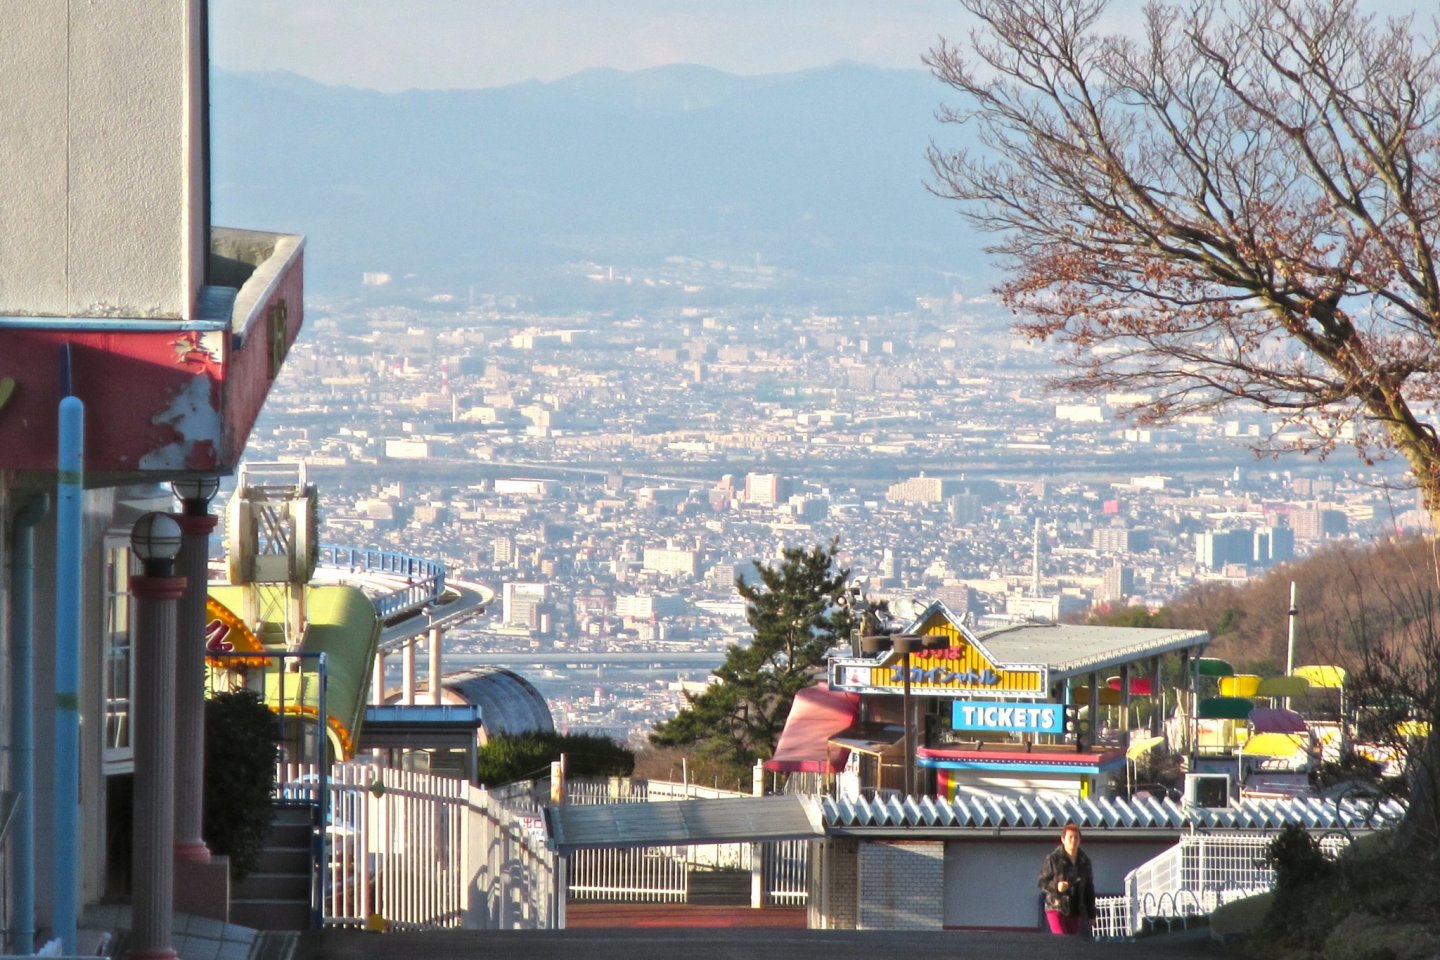 The amusement park and the view of Osaka from inside one of the walkways